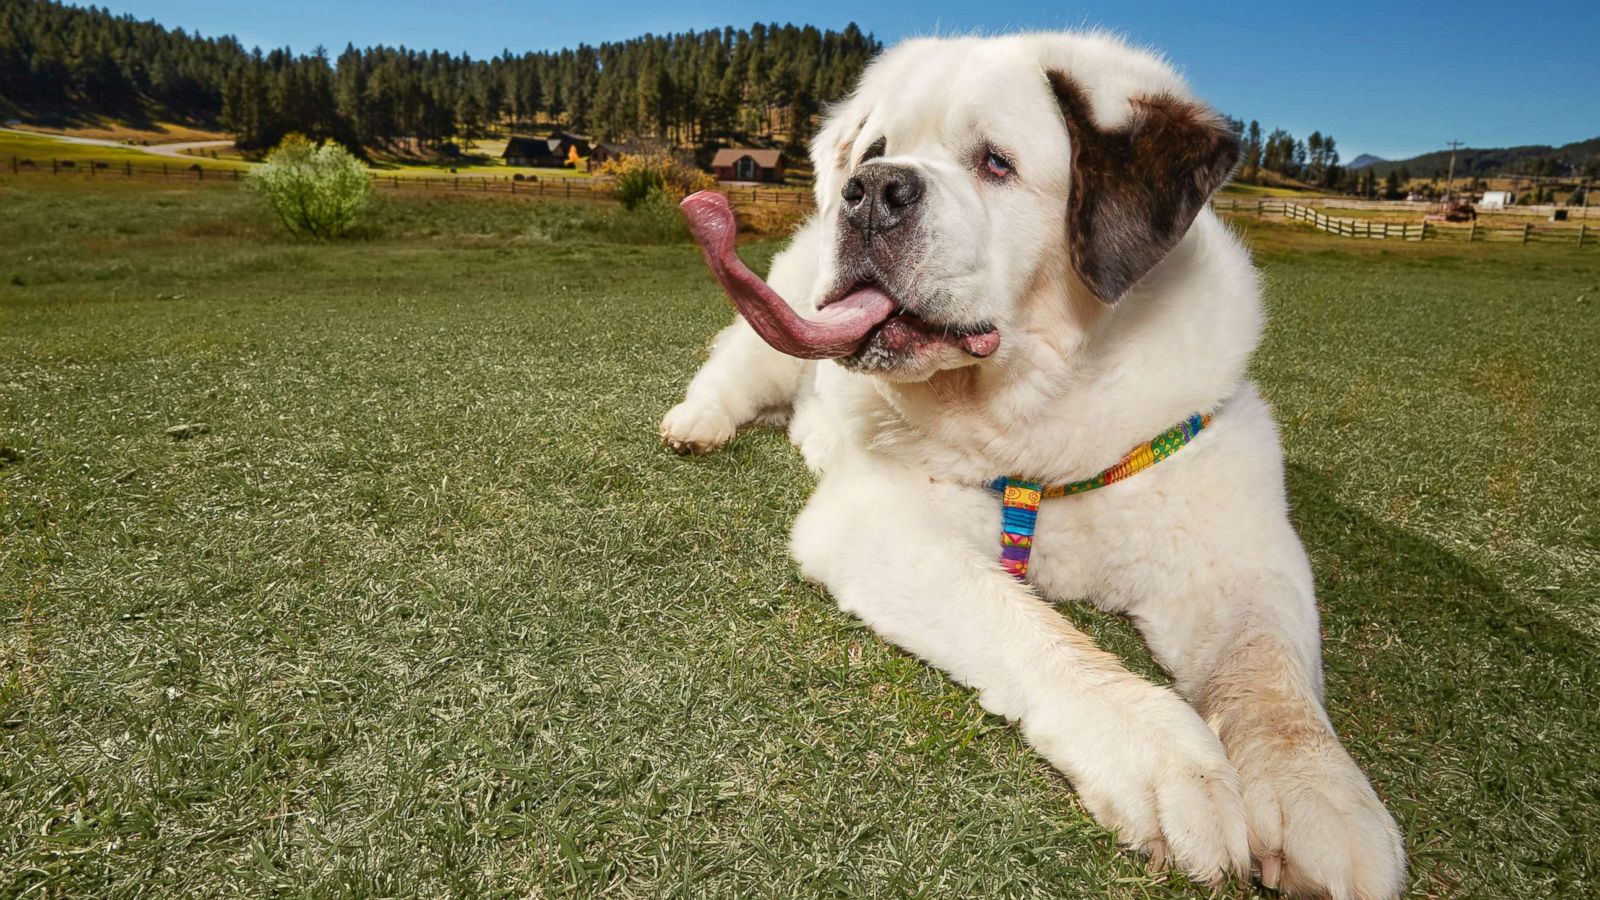 Mochi the St. Bernard earns world record for longest tongue on a dog - ABC  News